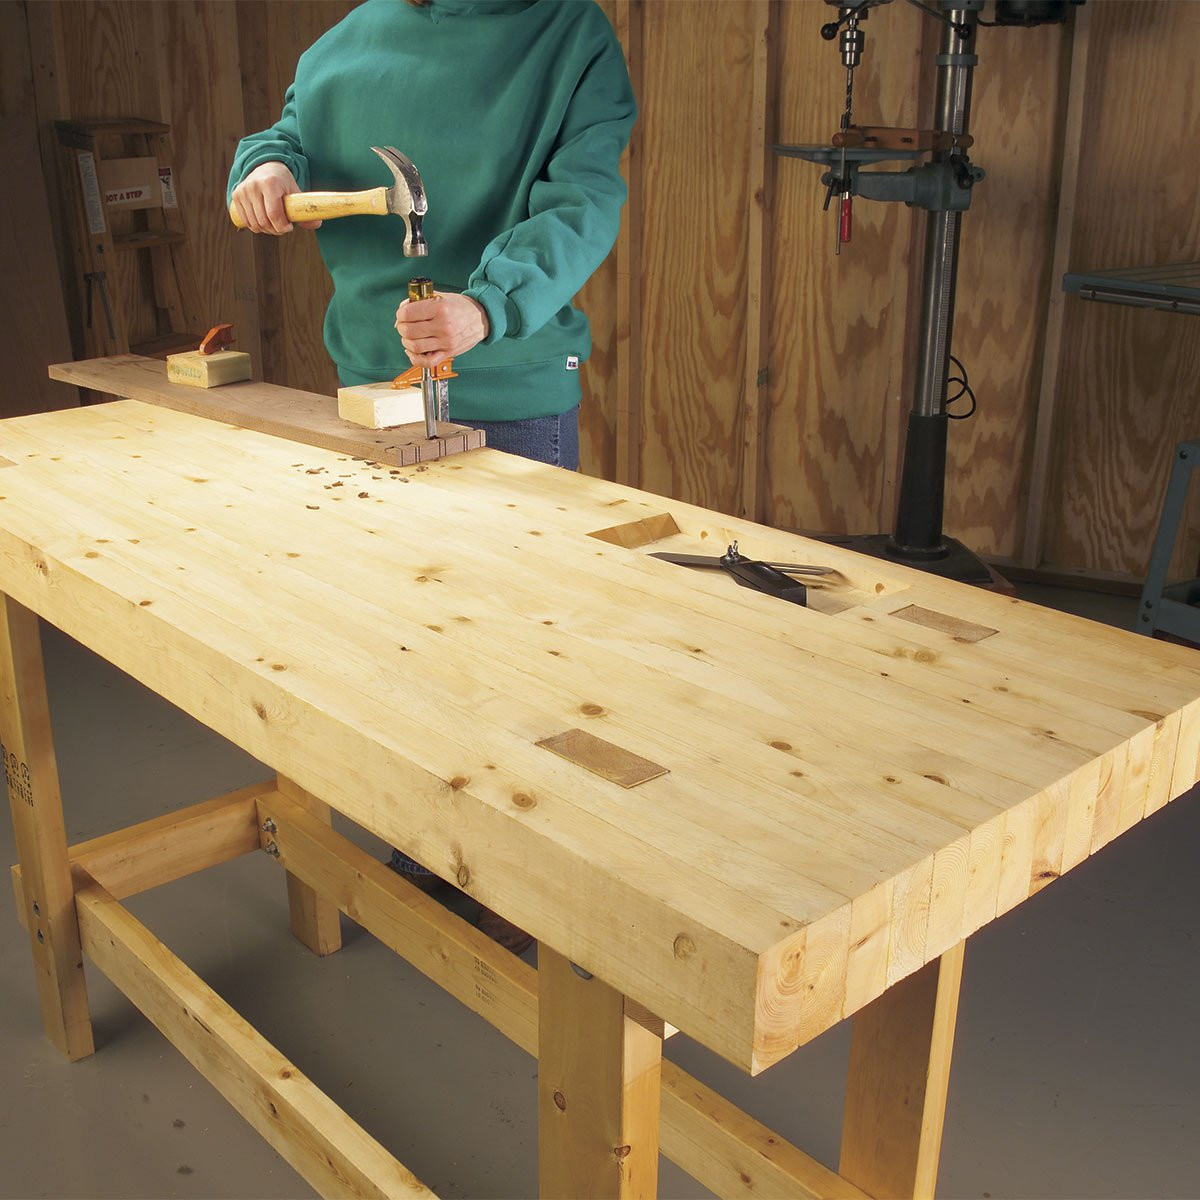 Work Bench Plans DIY
 12 Super Simple Workbenches You Can Build